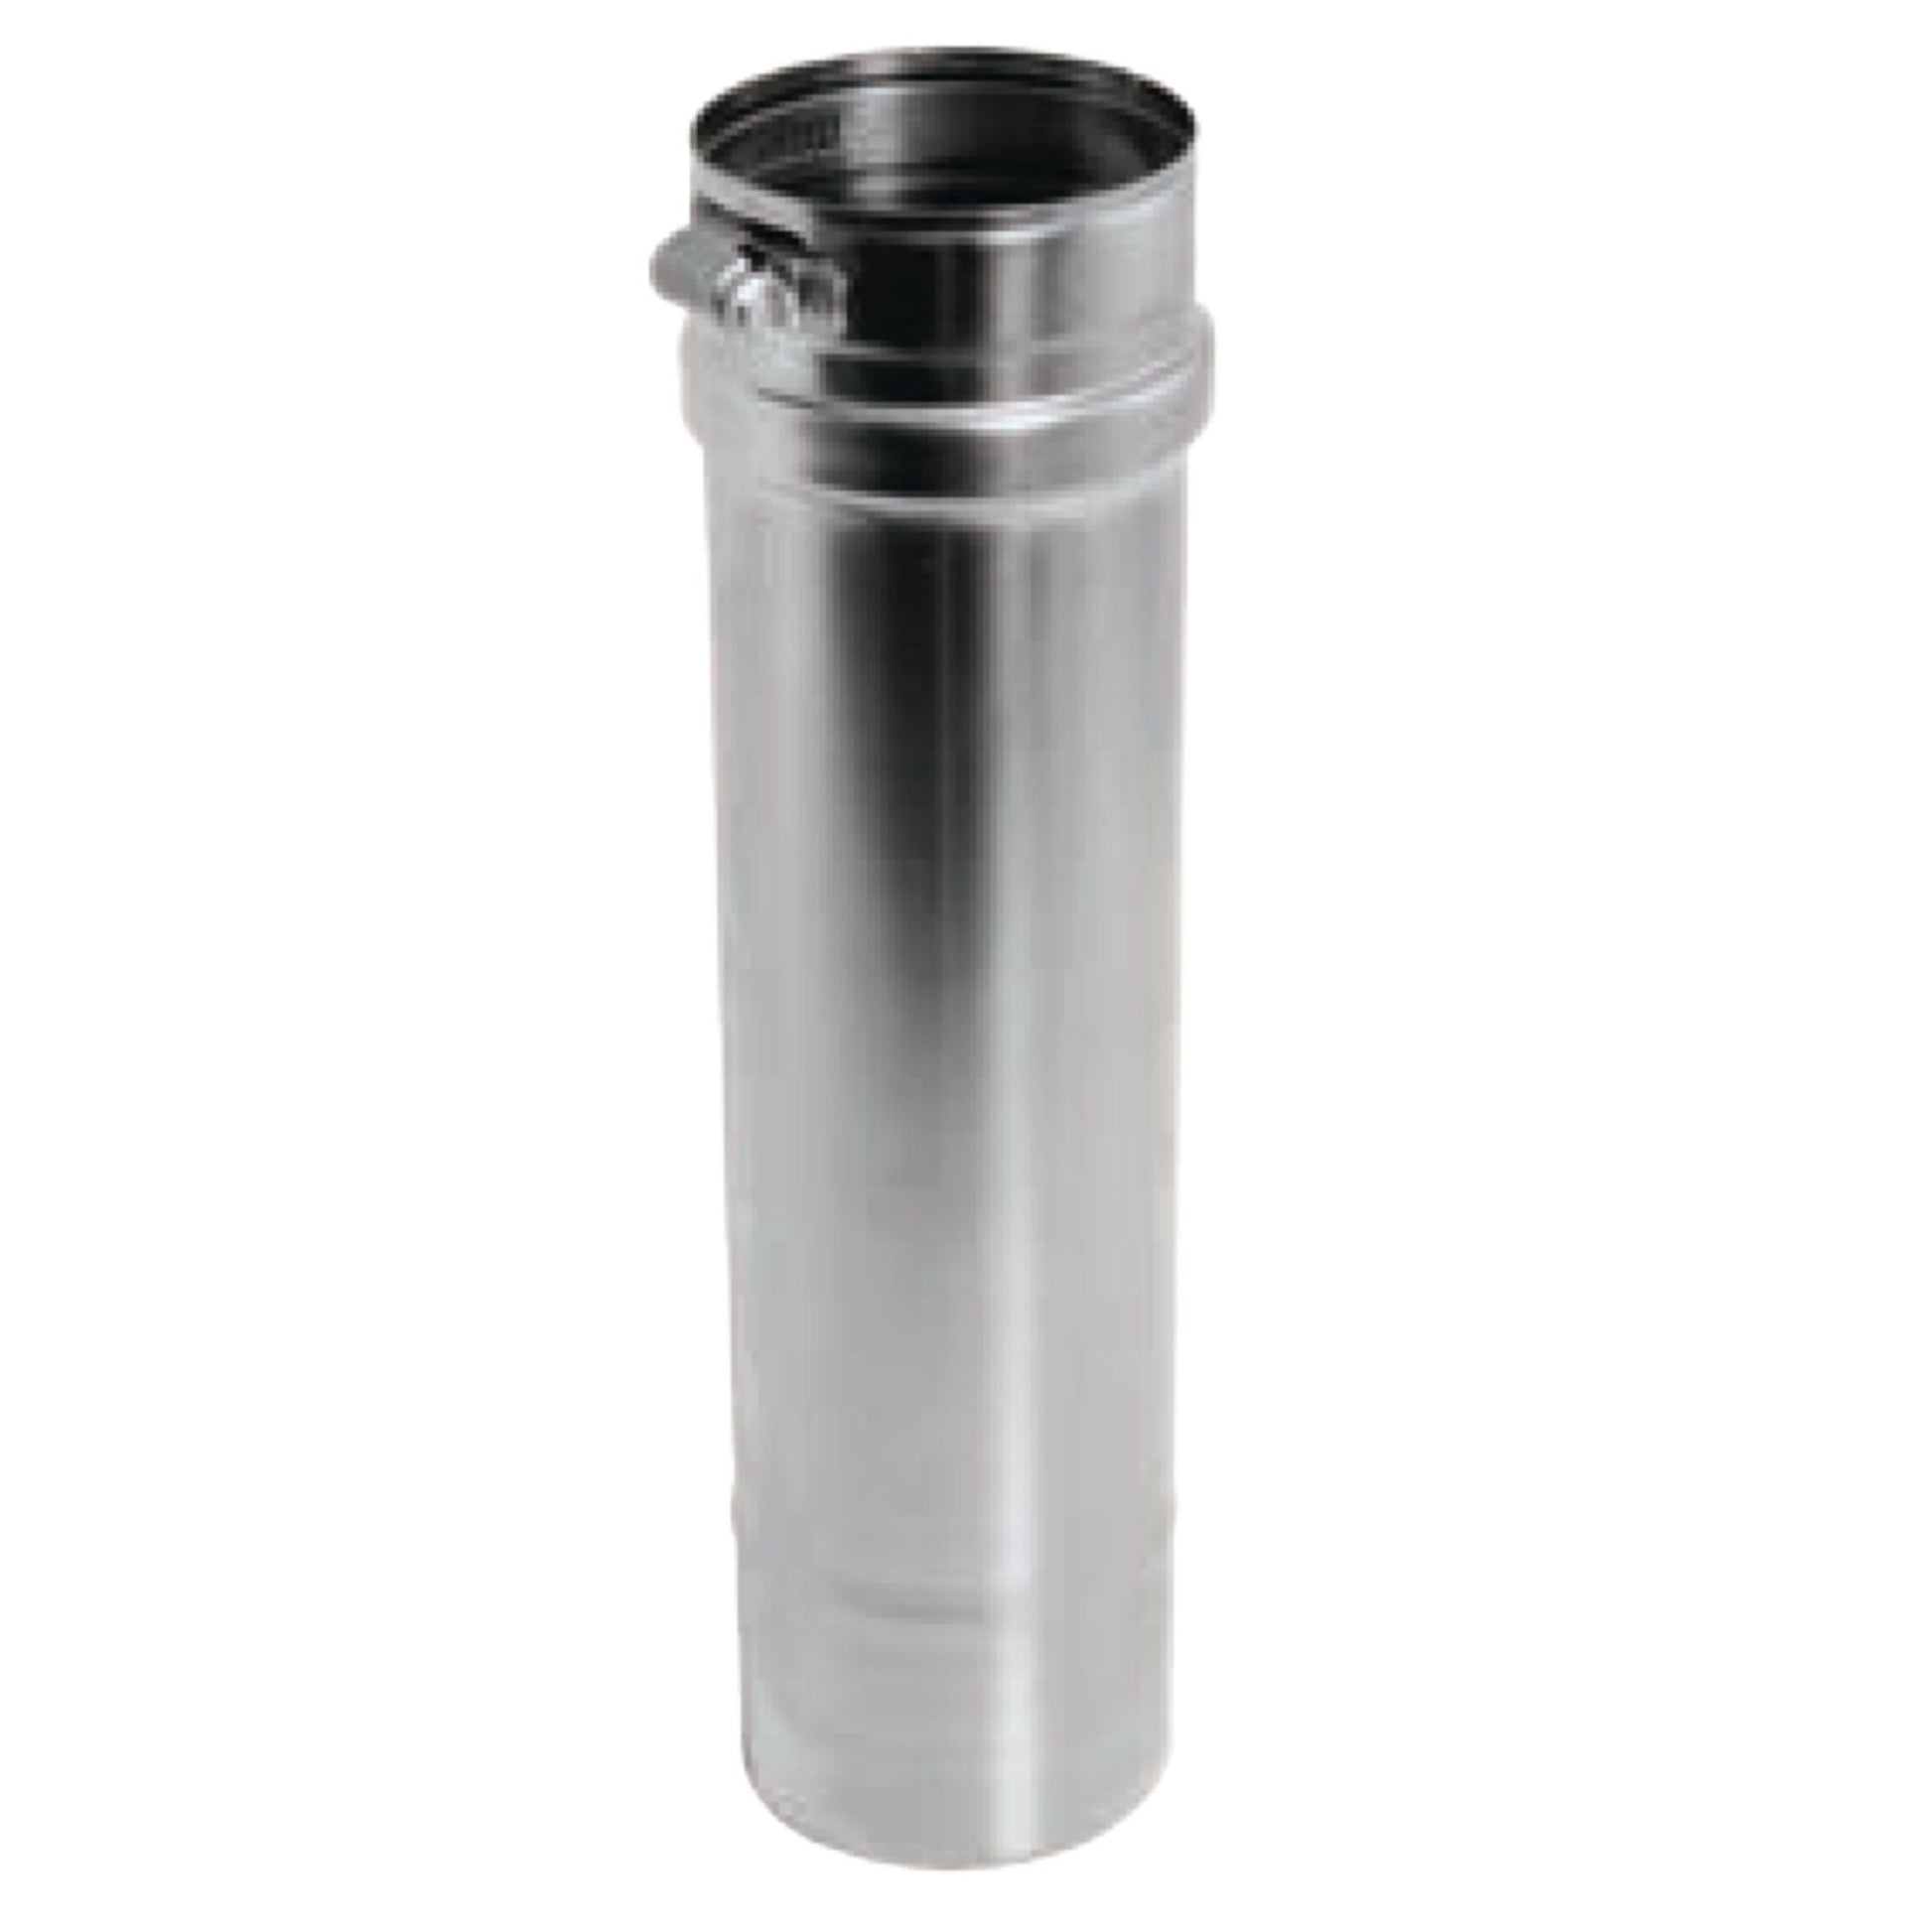 DuraVent FasNSeal 14" x 12" 29-4C Stainless Steel Vent Length